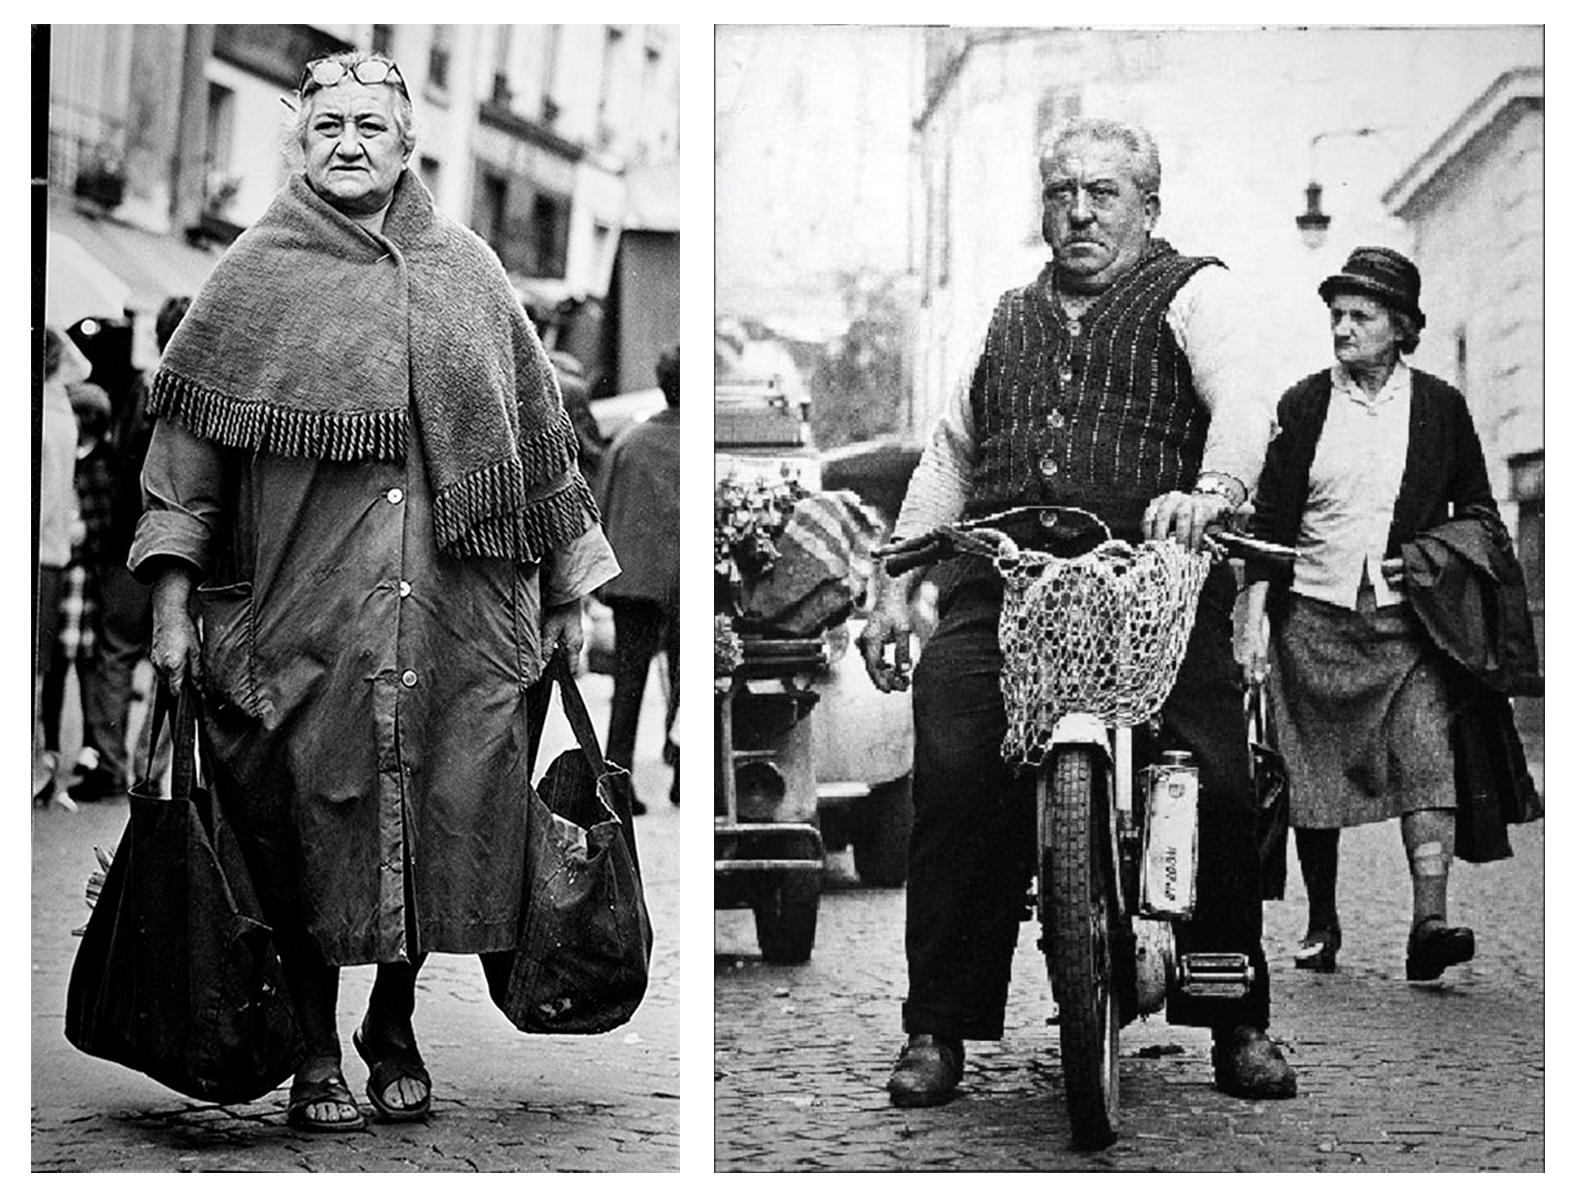 Uwe Ommer Figurative Photograph - Rue Mouffetard - Diptych. Black and White. Portraits. Paris